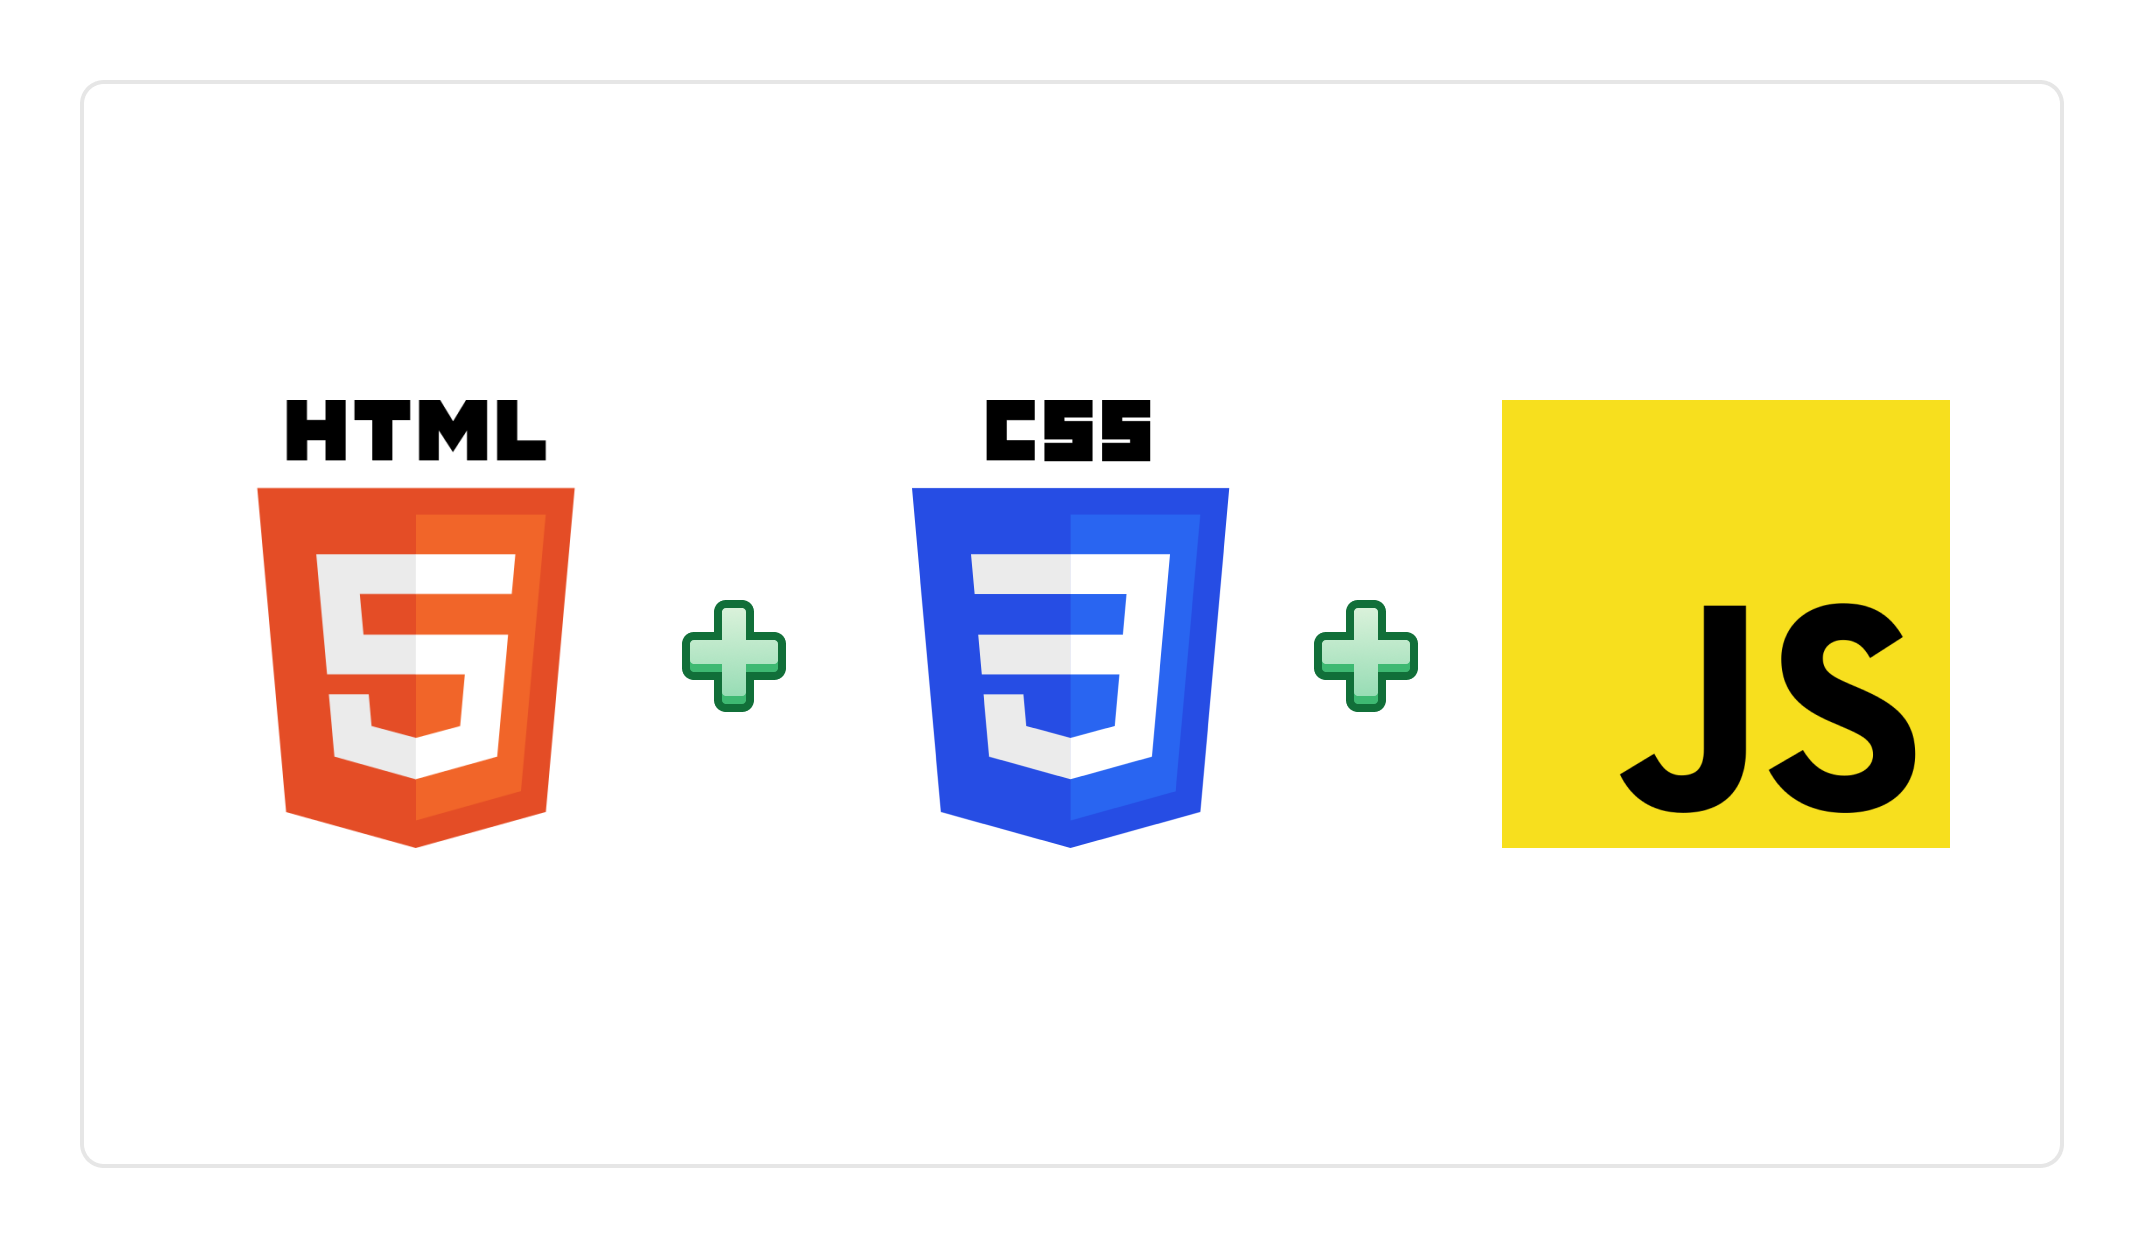 a static app is composed of HTML, CSS, and JavaScript